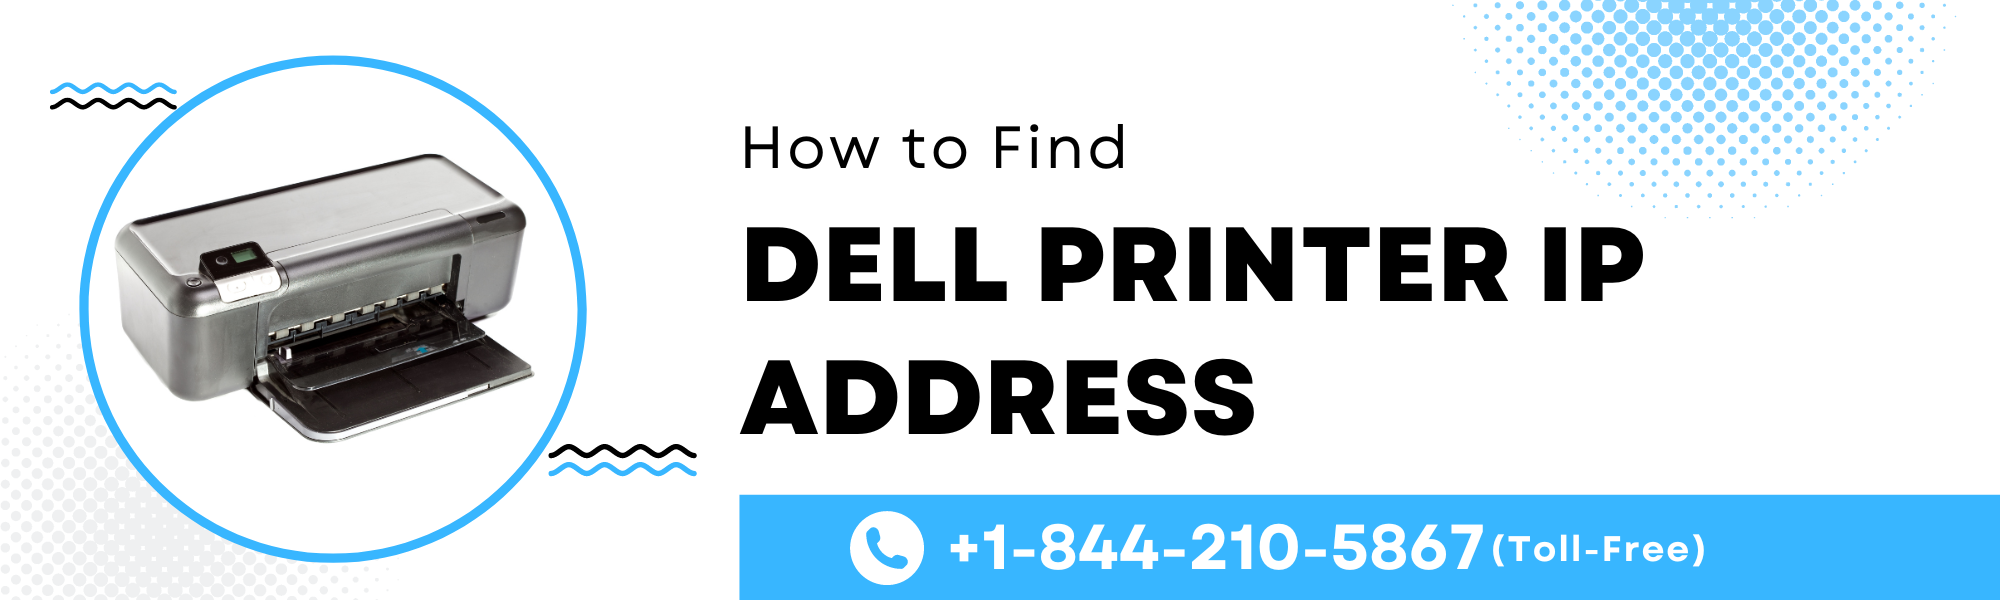 How to Find Dell Printer IP Address